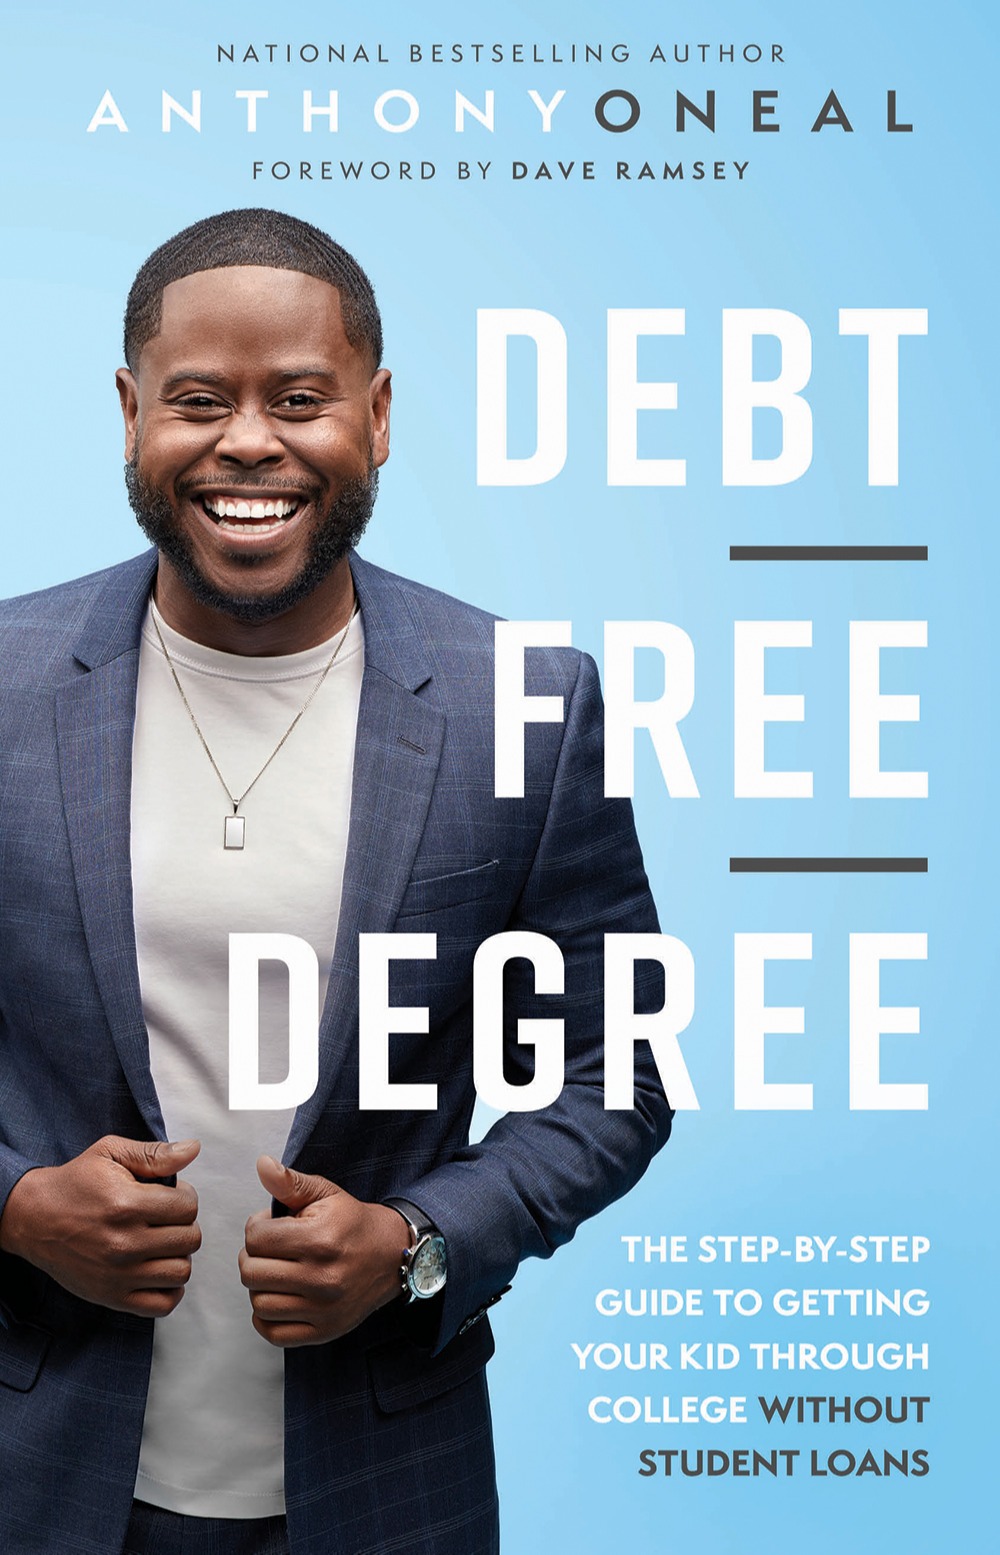 Anthony Oneal Tells Us How to Get a Debt-Free Degree